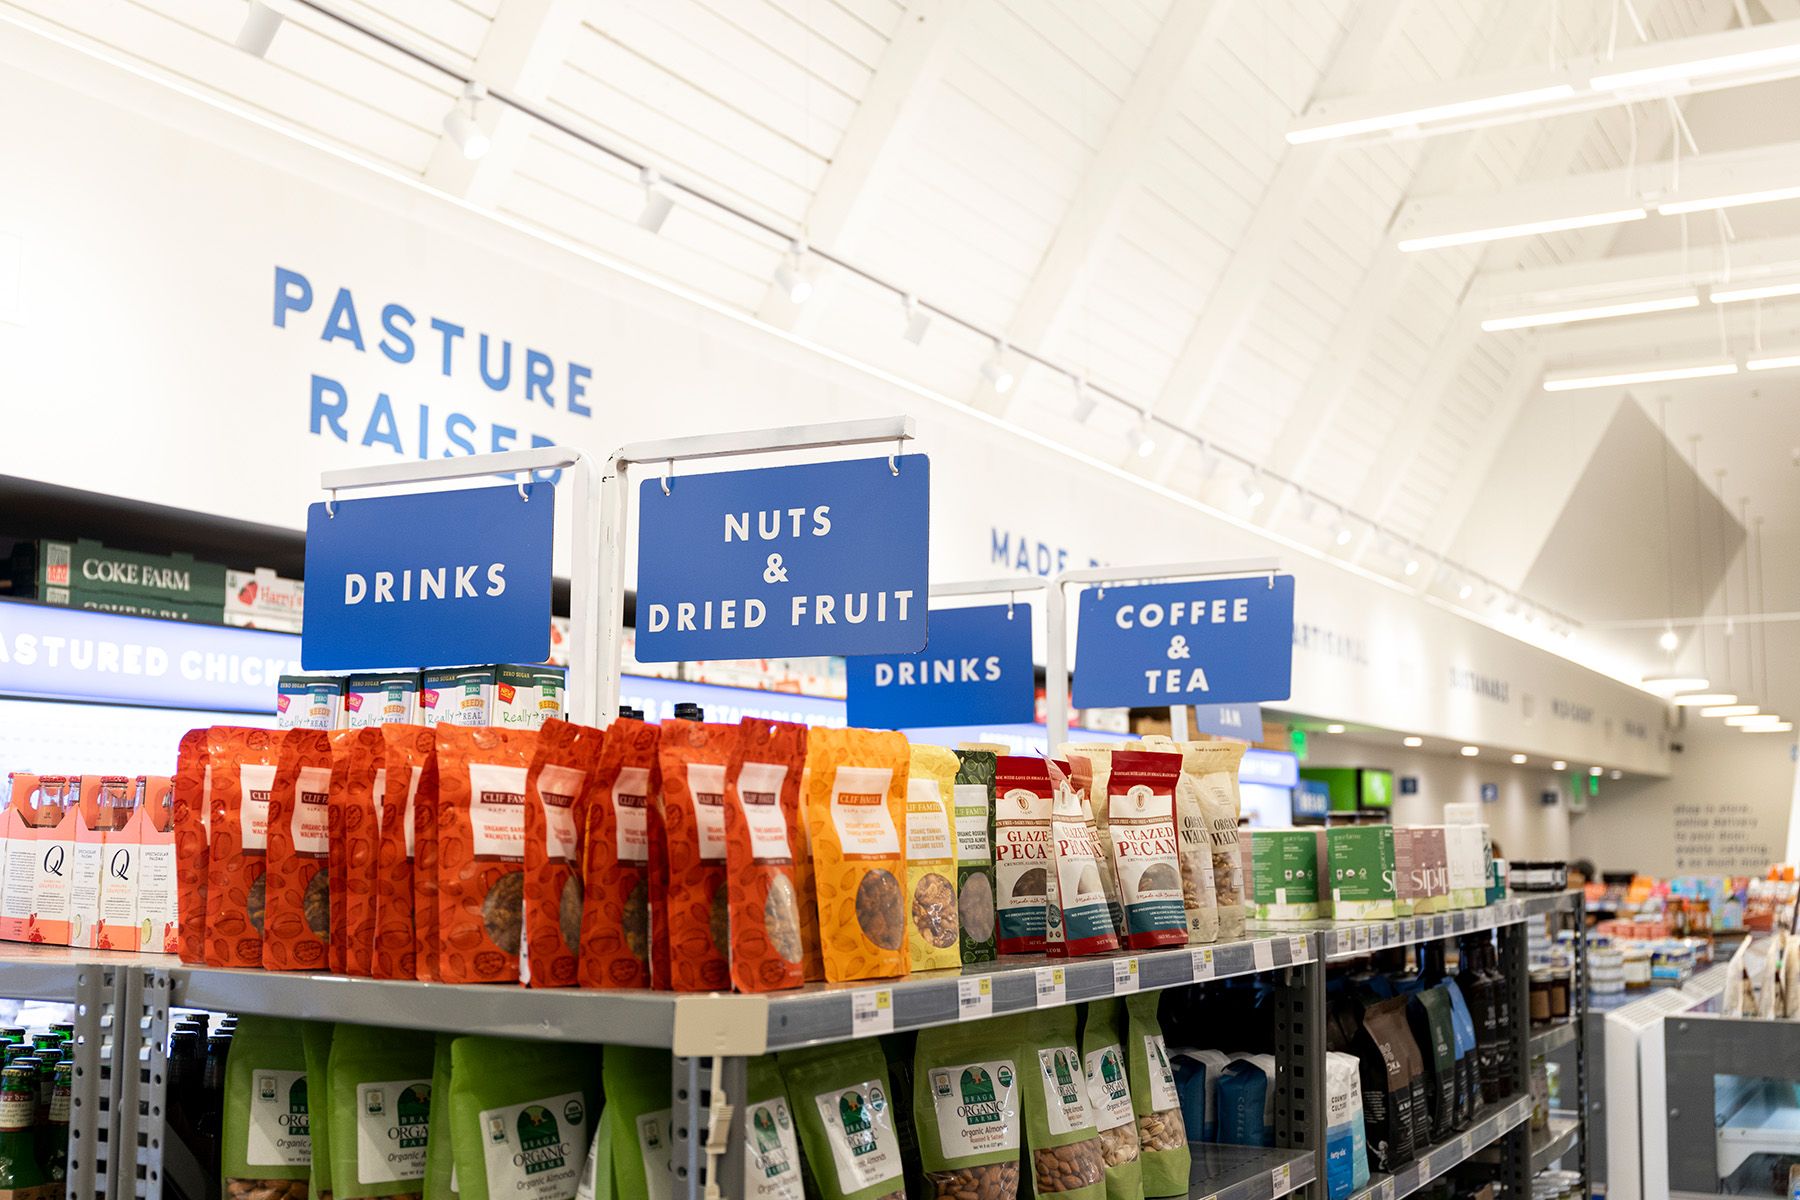 White LED track lights illuminate signage and product displays in an organic grocery store.